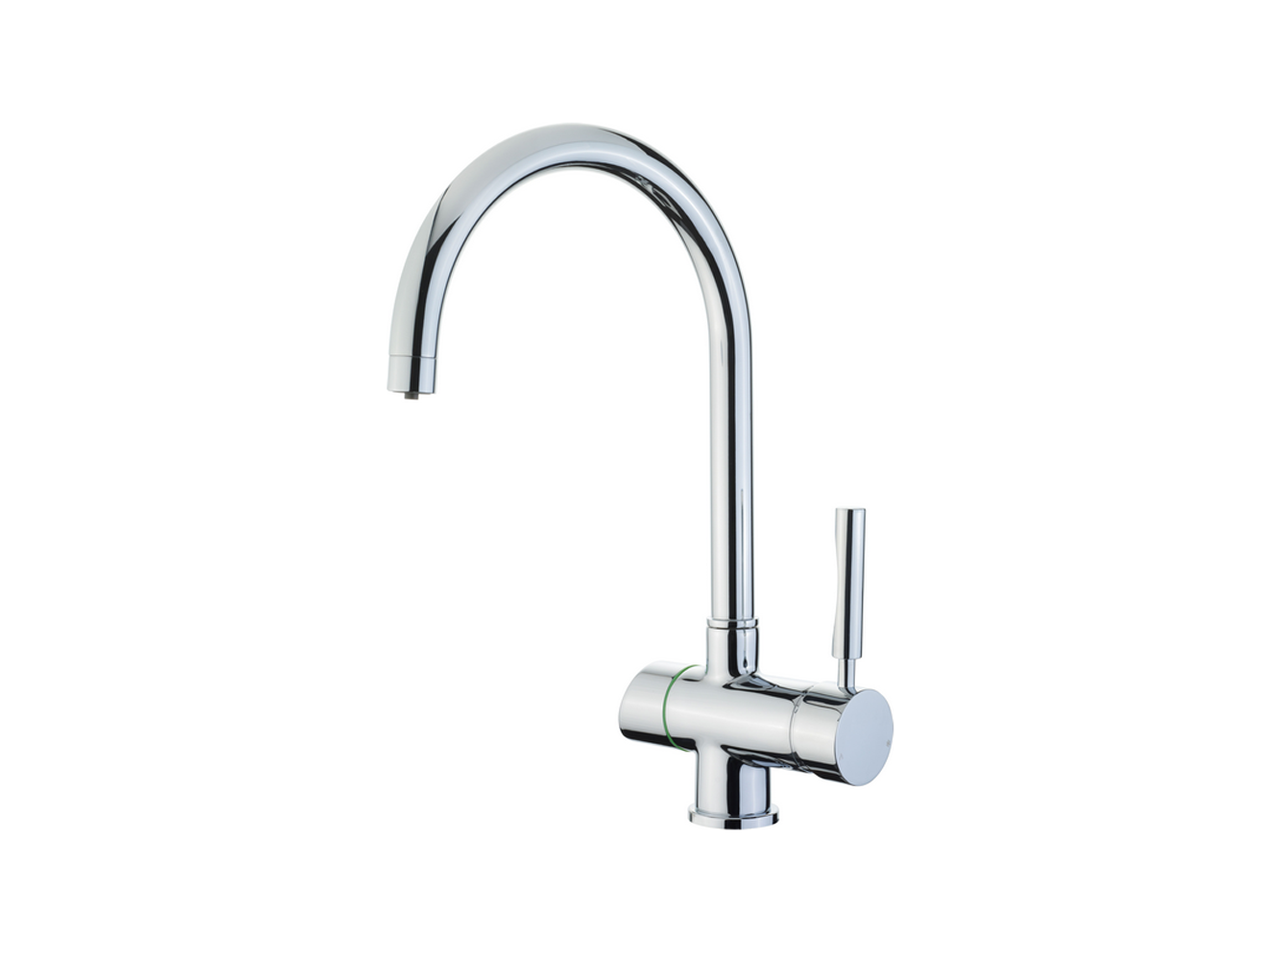 HUBERSingle lever sink mixer for OSMOSIS KITCHEN